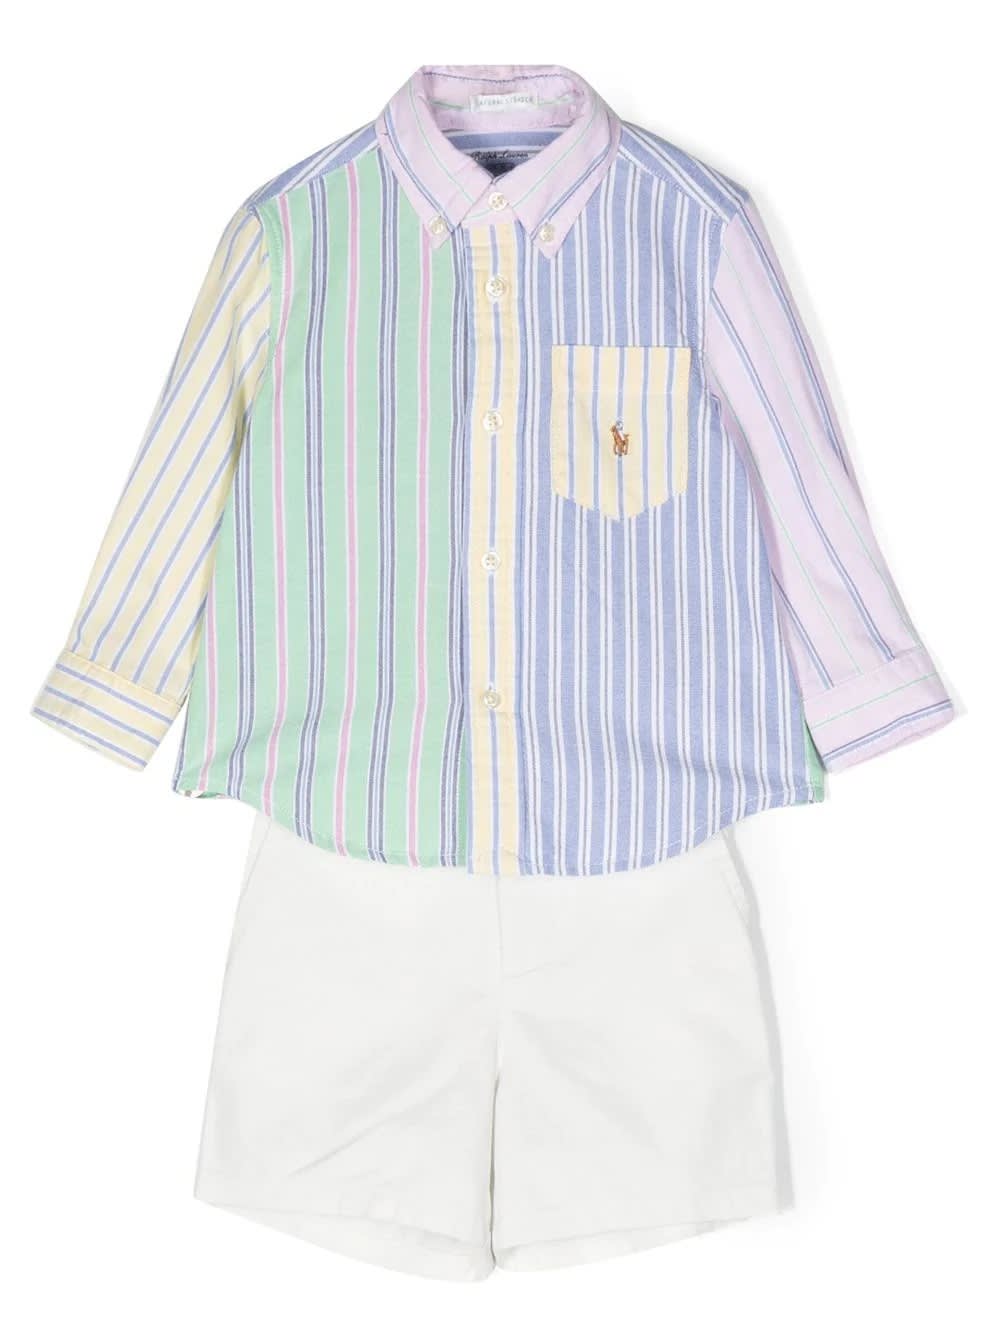 RALPH LAUREN SET WITH WHITE SHORTS AND MULTICOLOURED STRIPED SHIRT